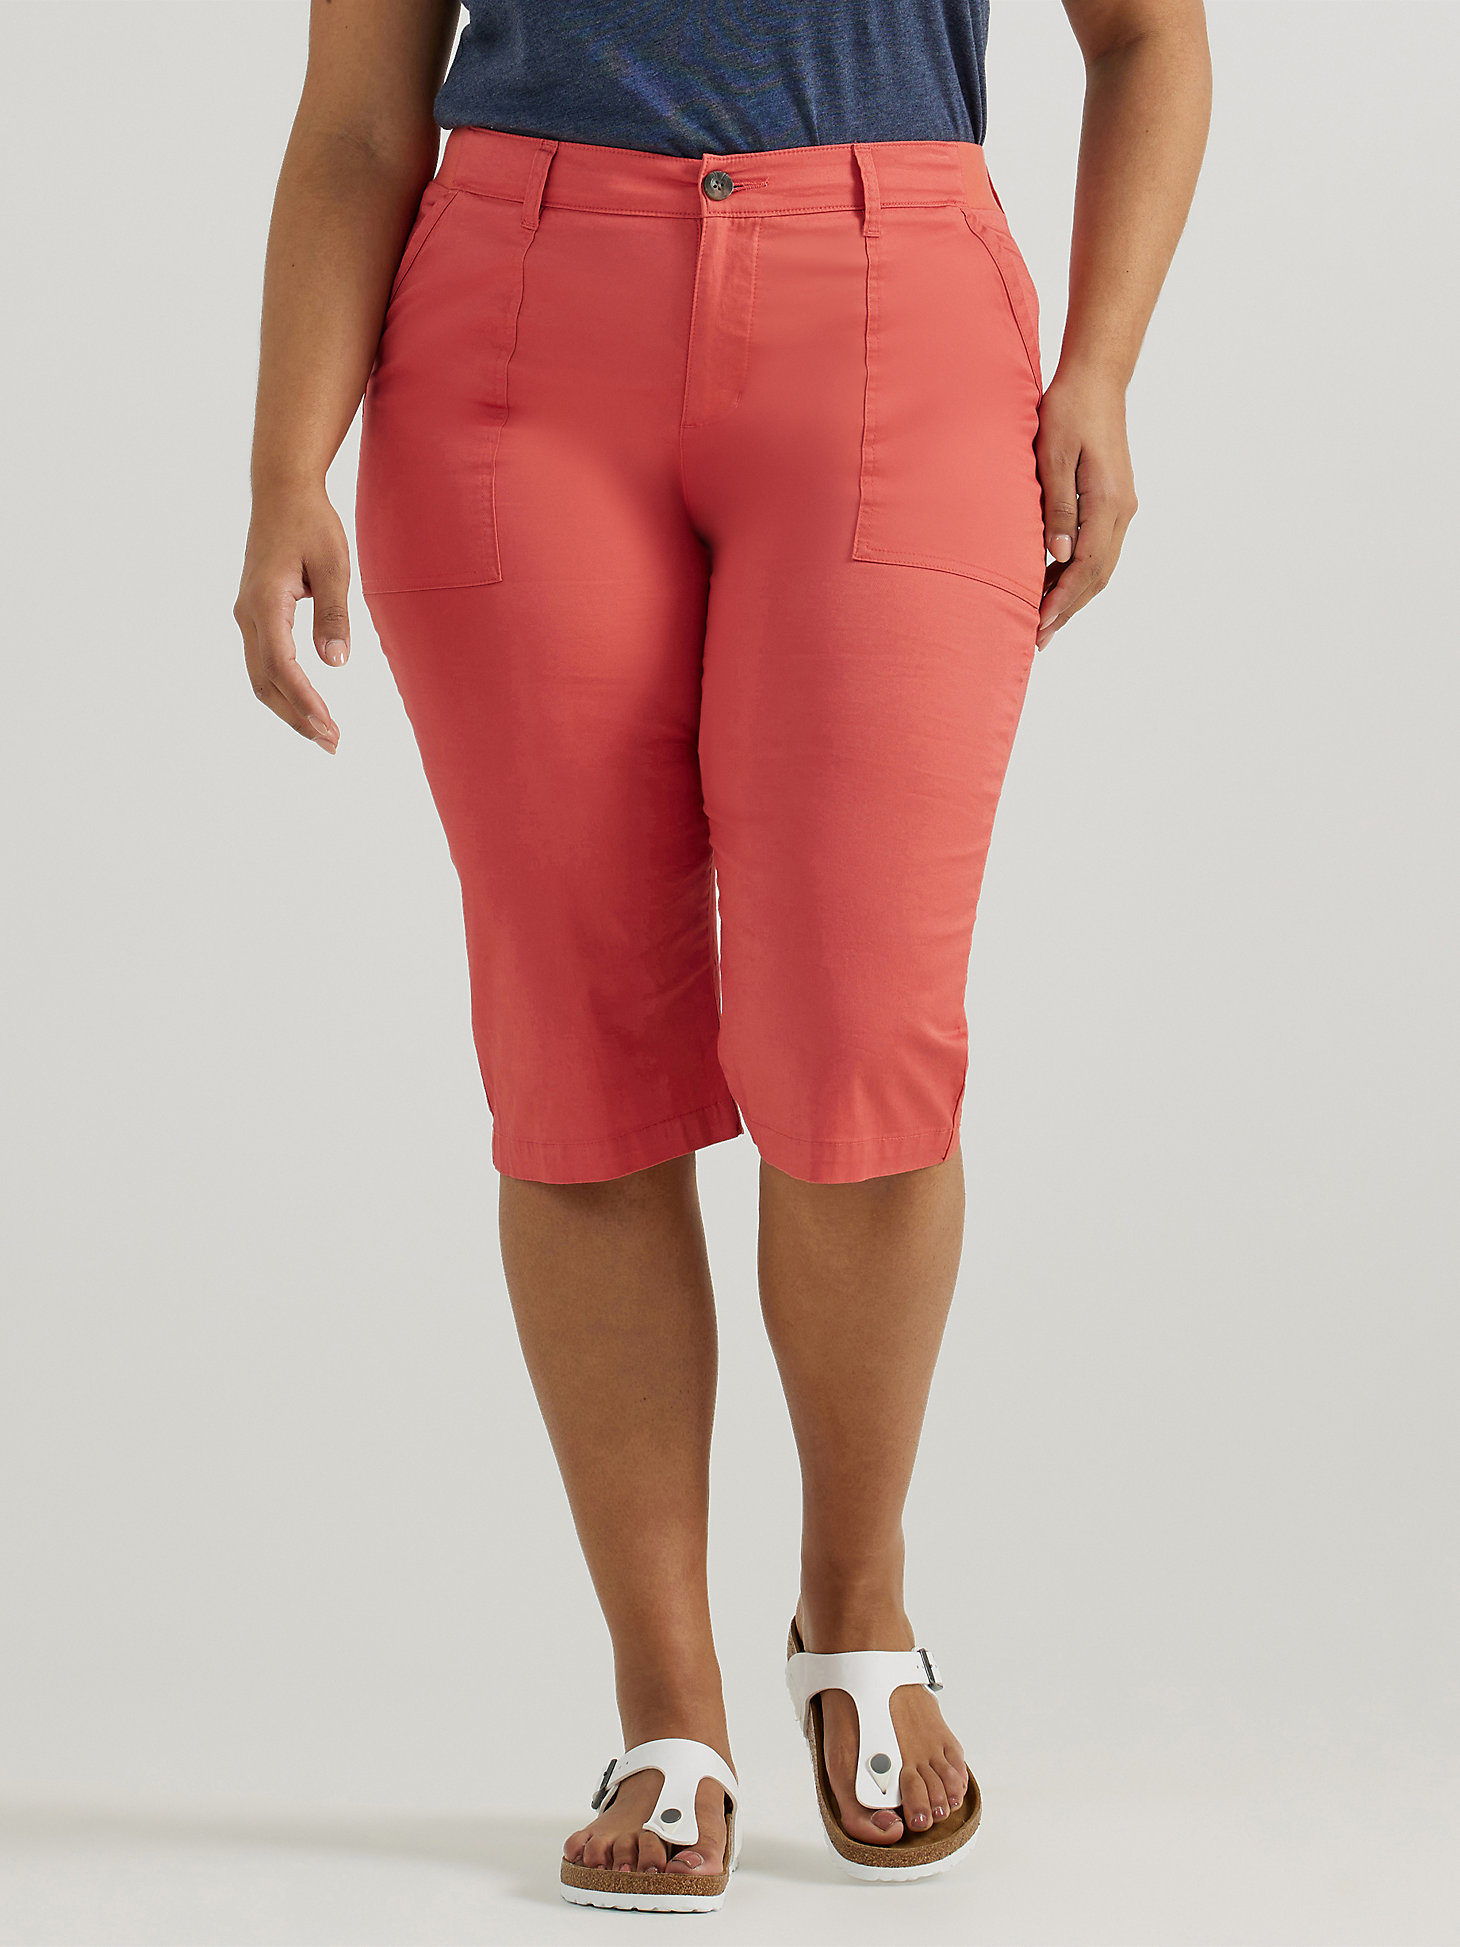 Women's Ultra Lux Comfort with Flex-to-Go Relaxed Fit Utility Skimmer (Plus)